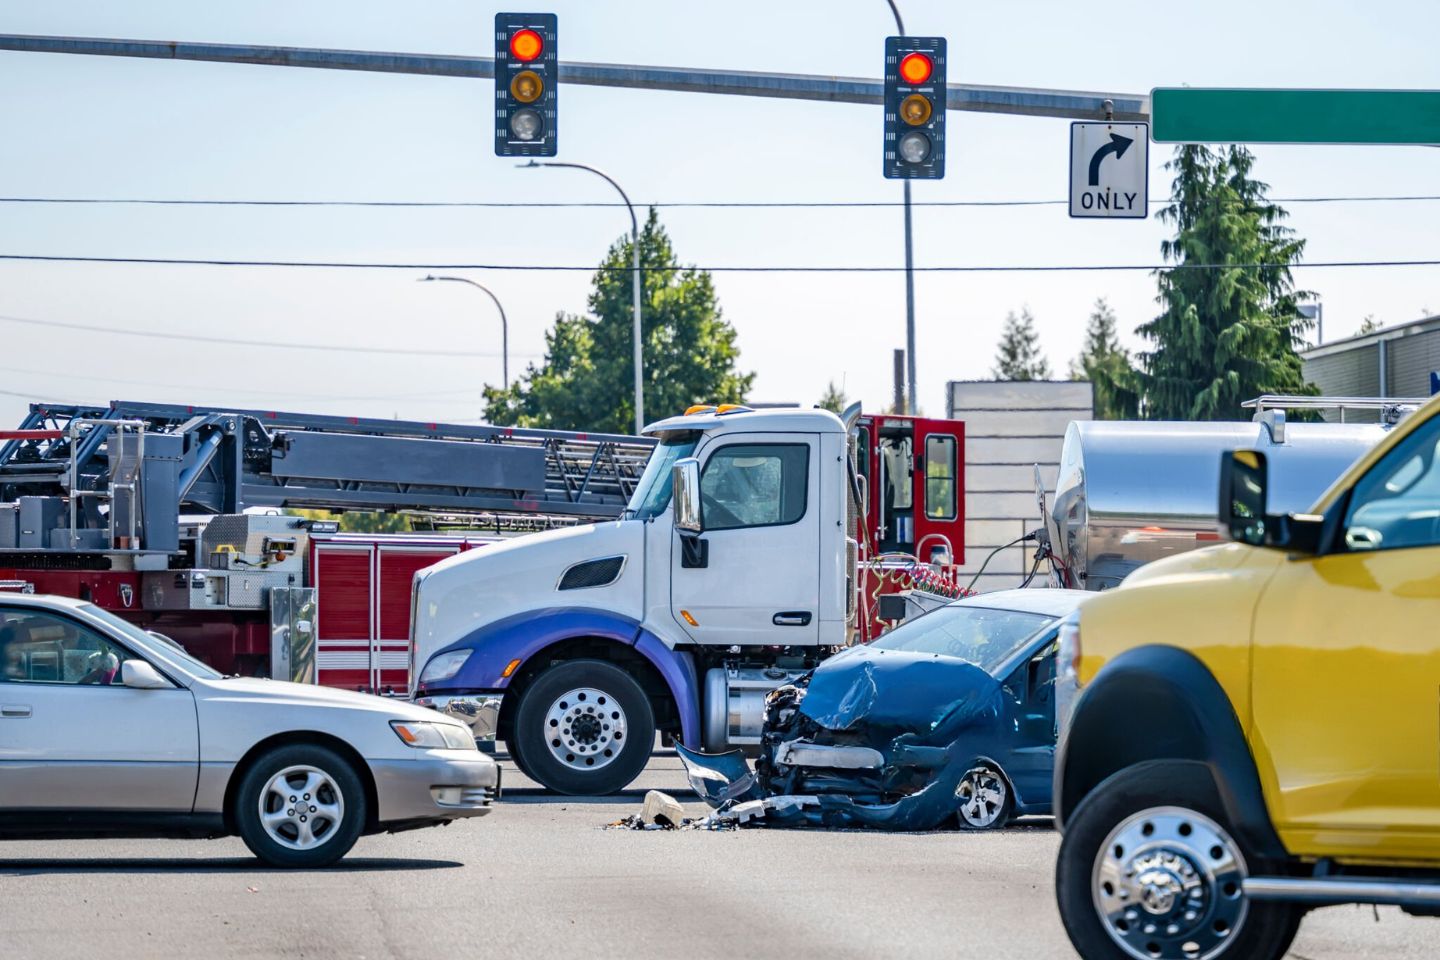 Proving Liability in a Truck Accident